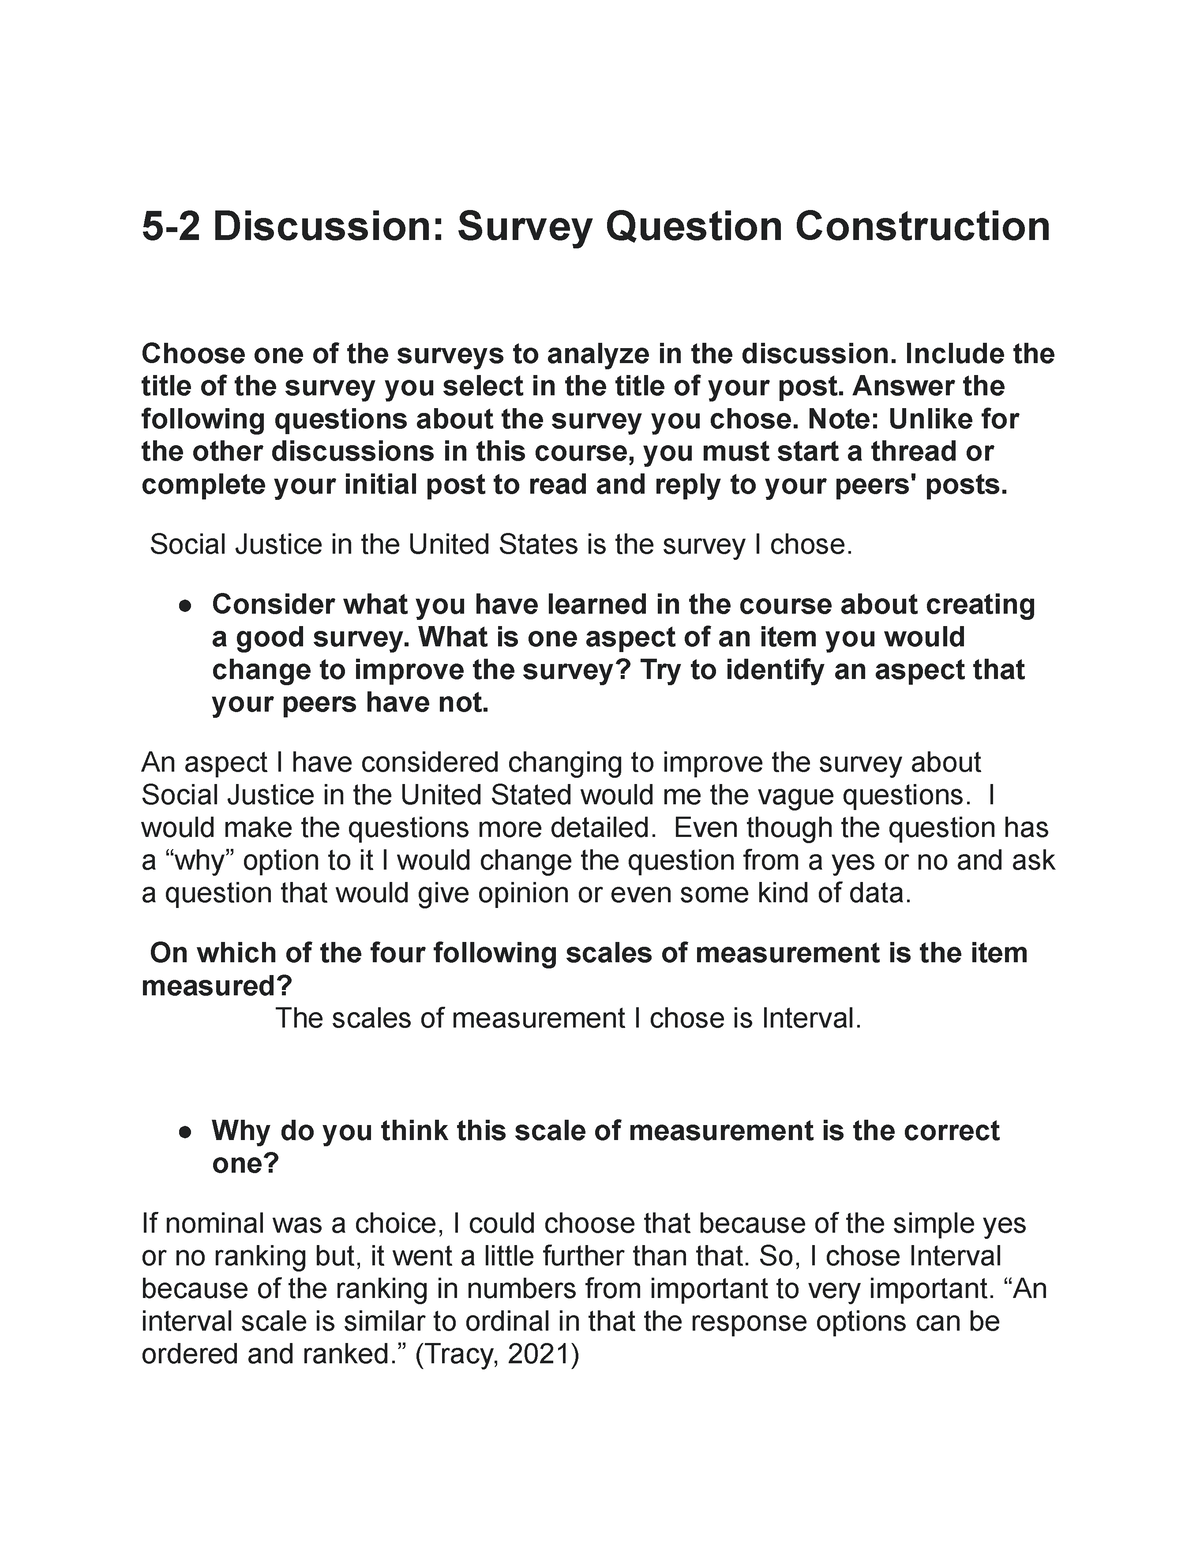 52 Discussion Survey Question Construction Include the title of the